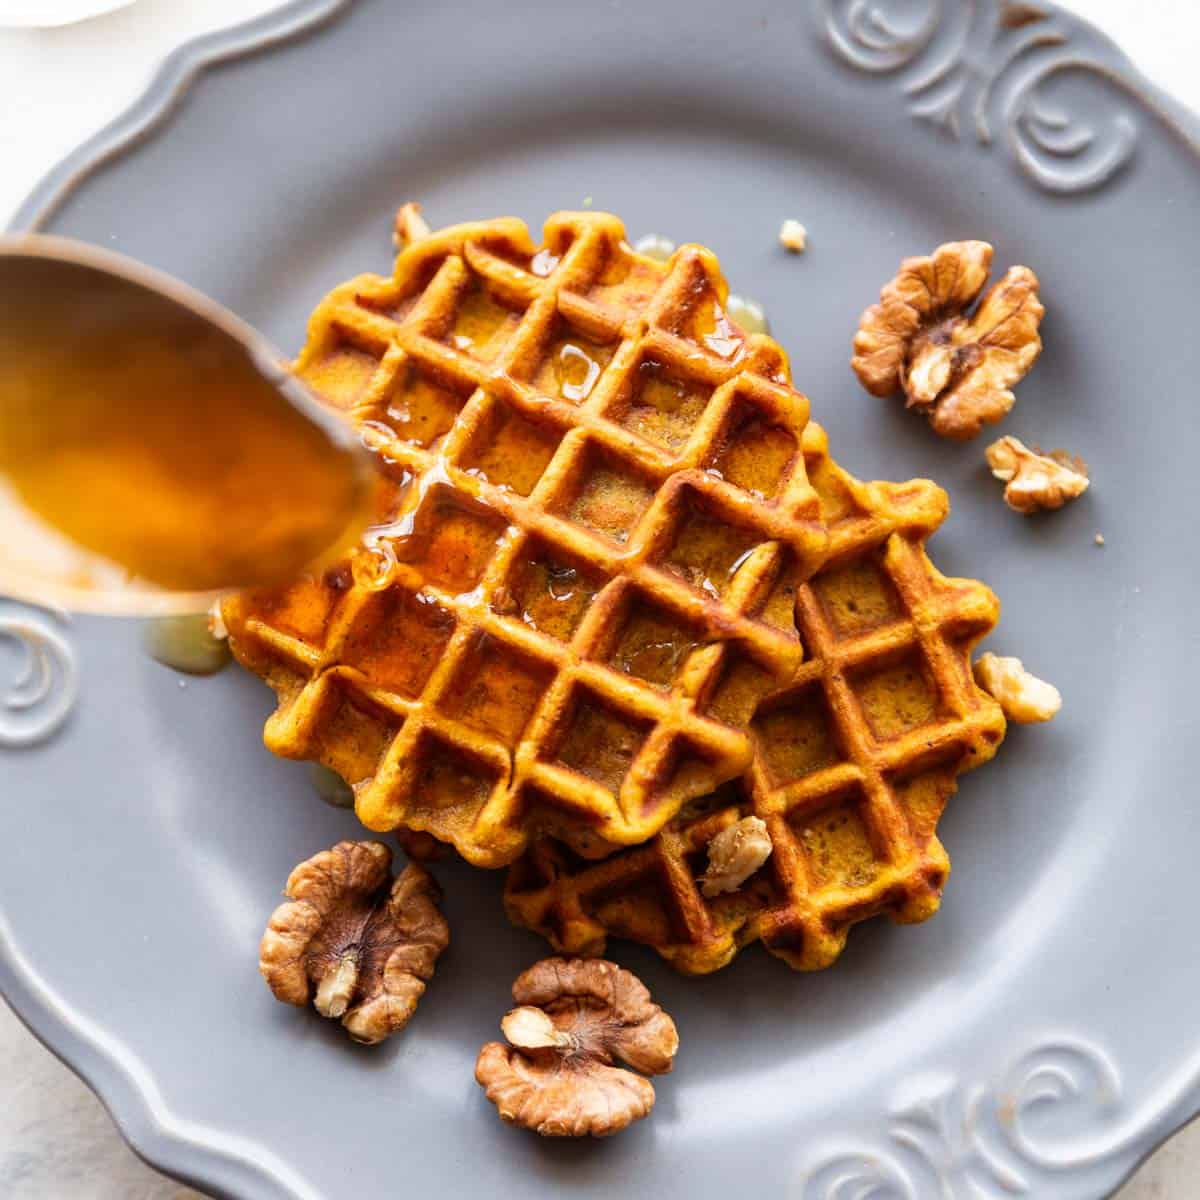 Spoon drizzling honey over two pumpkin waffles served on a plate